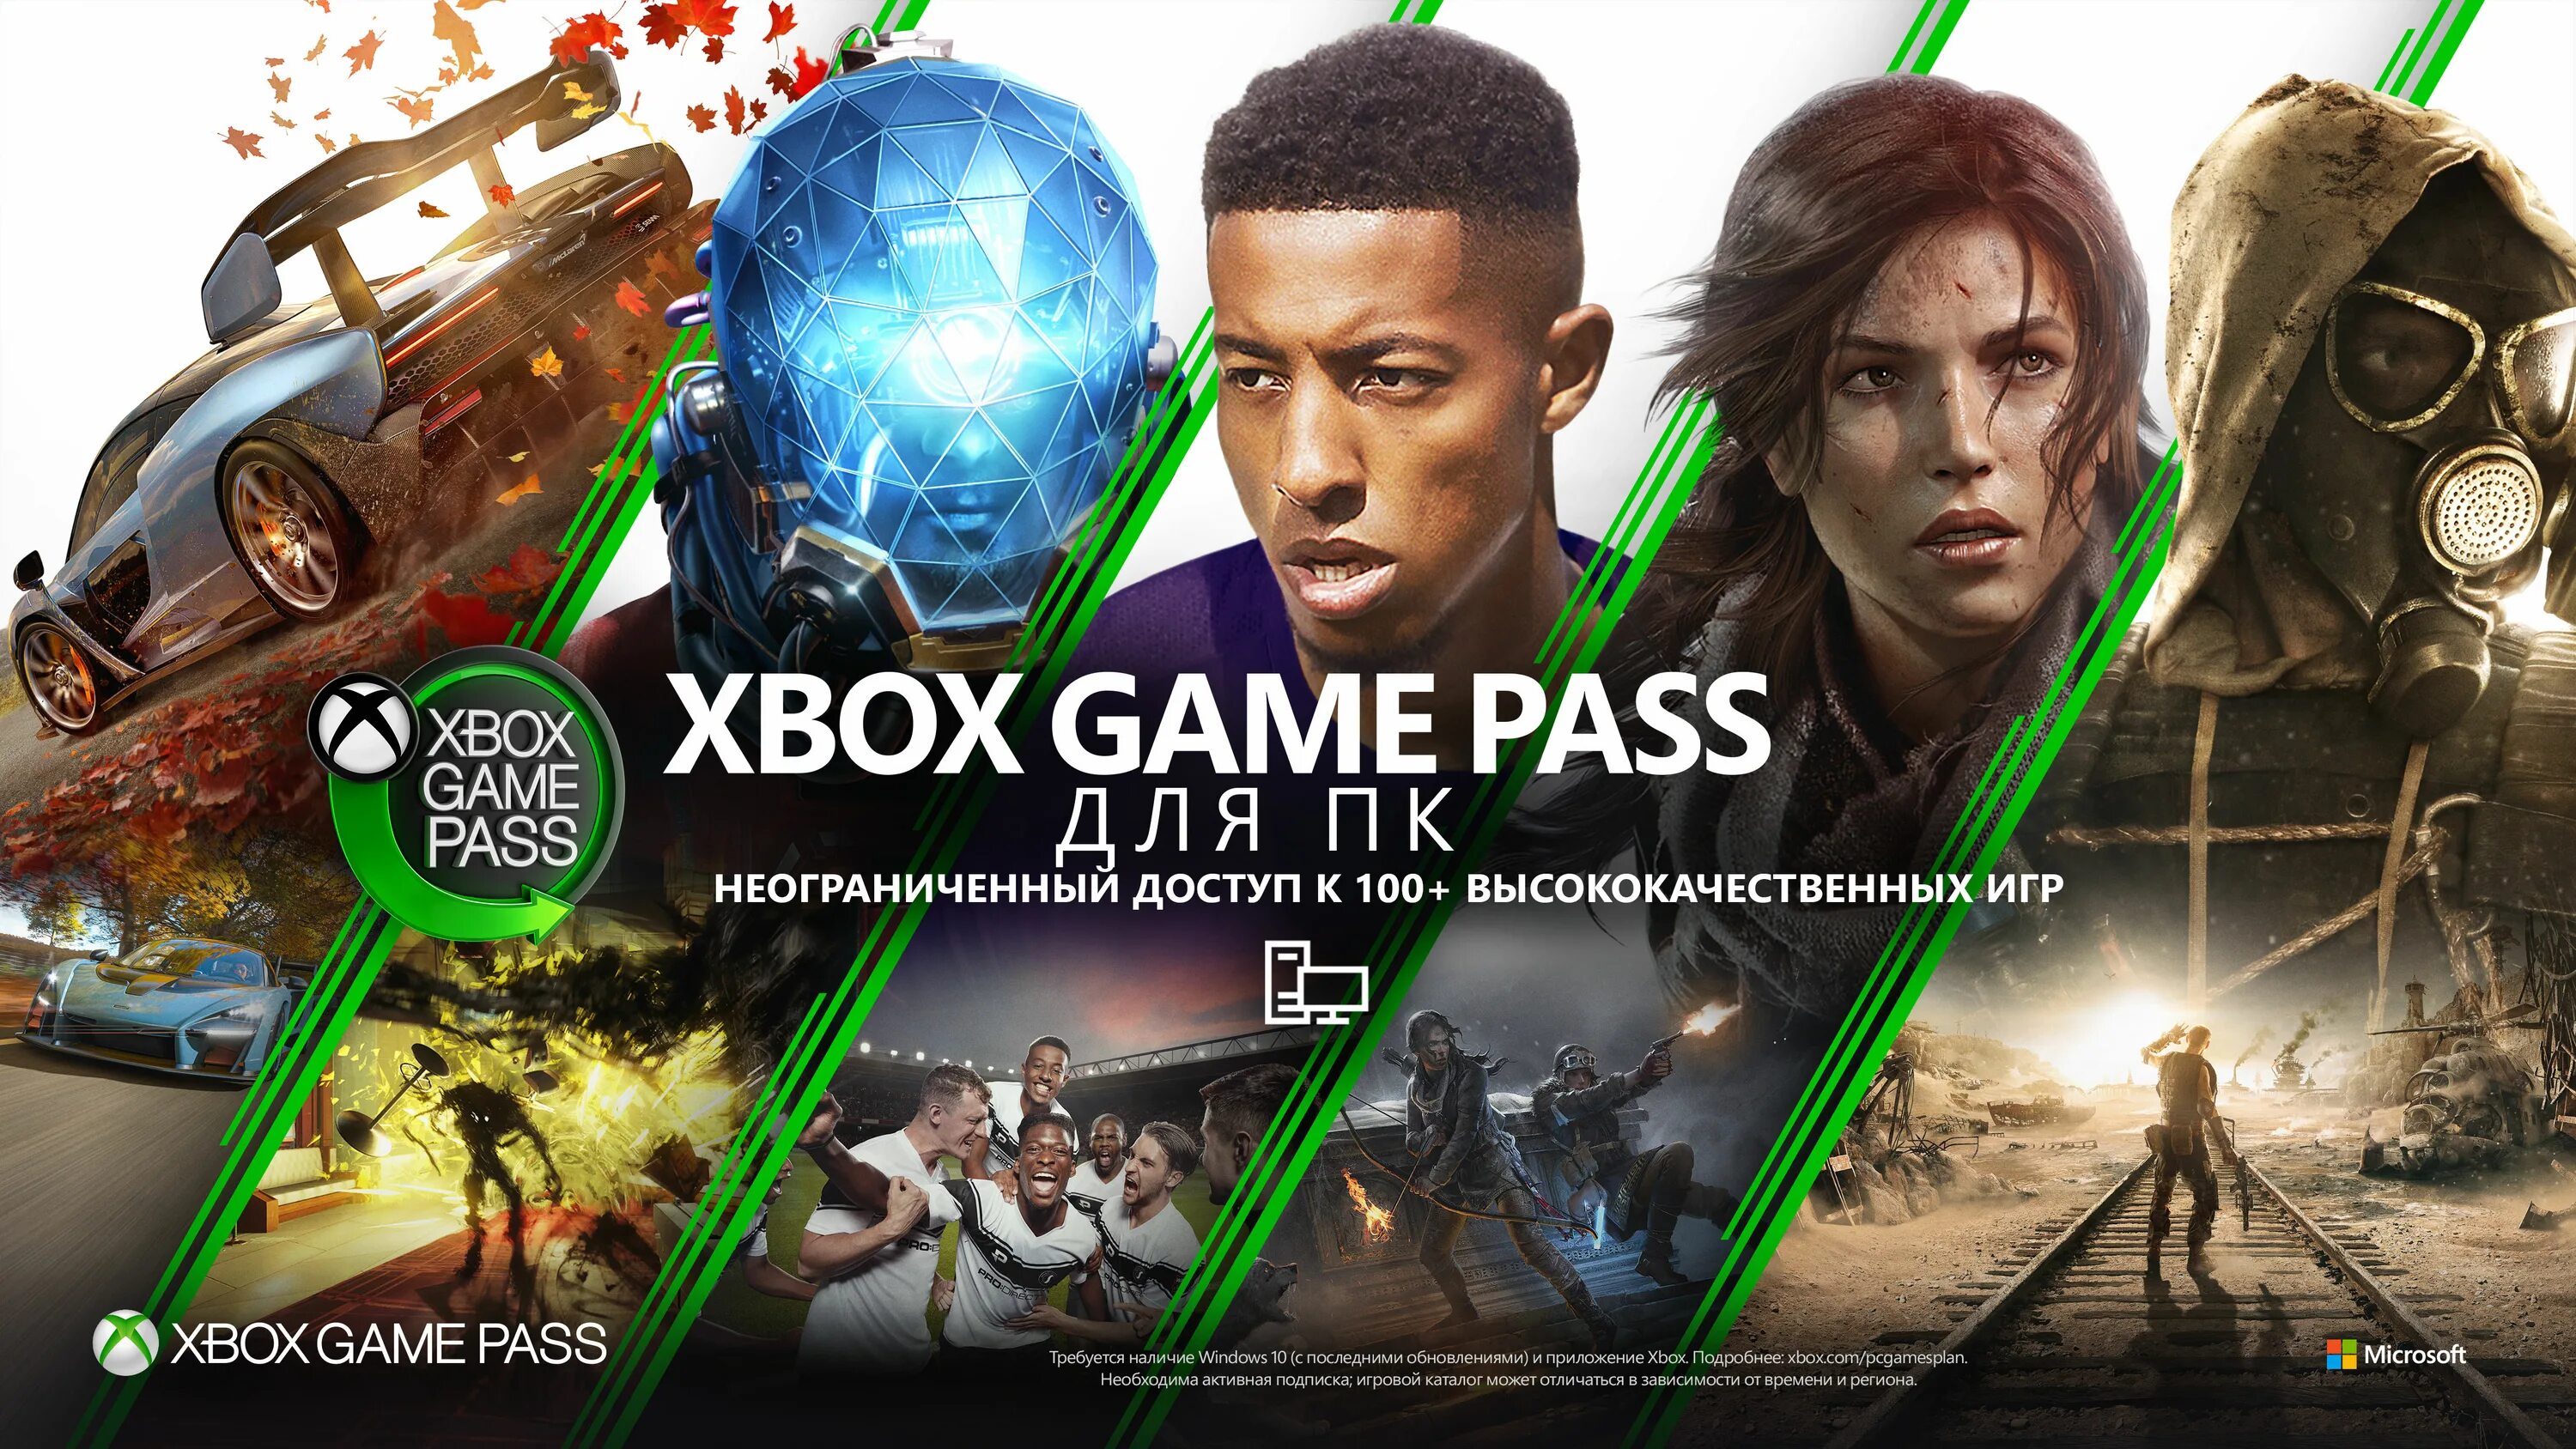 Xbox game pass консоль. Xbox game Pass Ultimate 2 месяца. Xbox game Pass 3 PC. Гаме пасс для иксбокс игры. Xbox game Pass Ultimate PC.